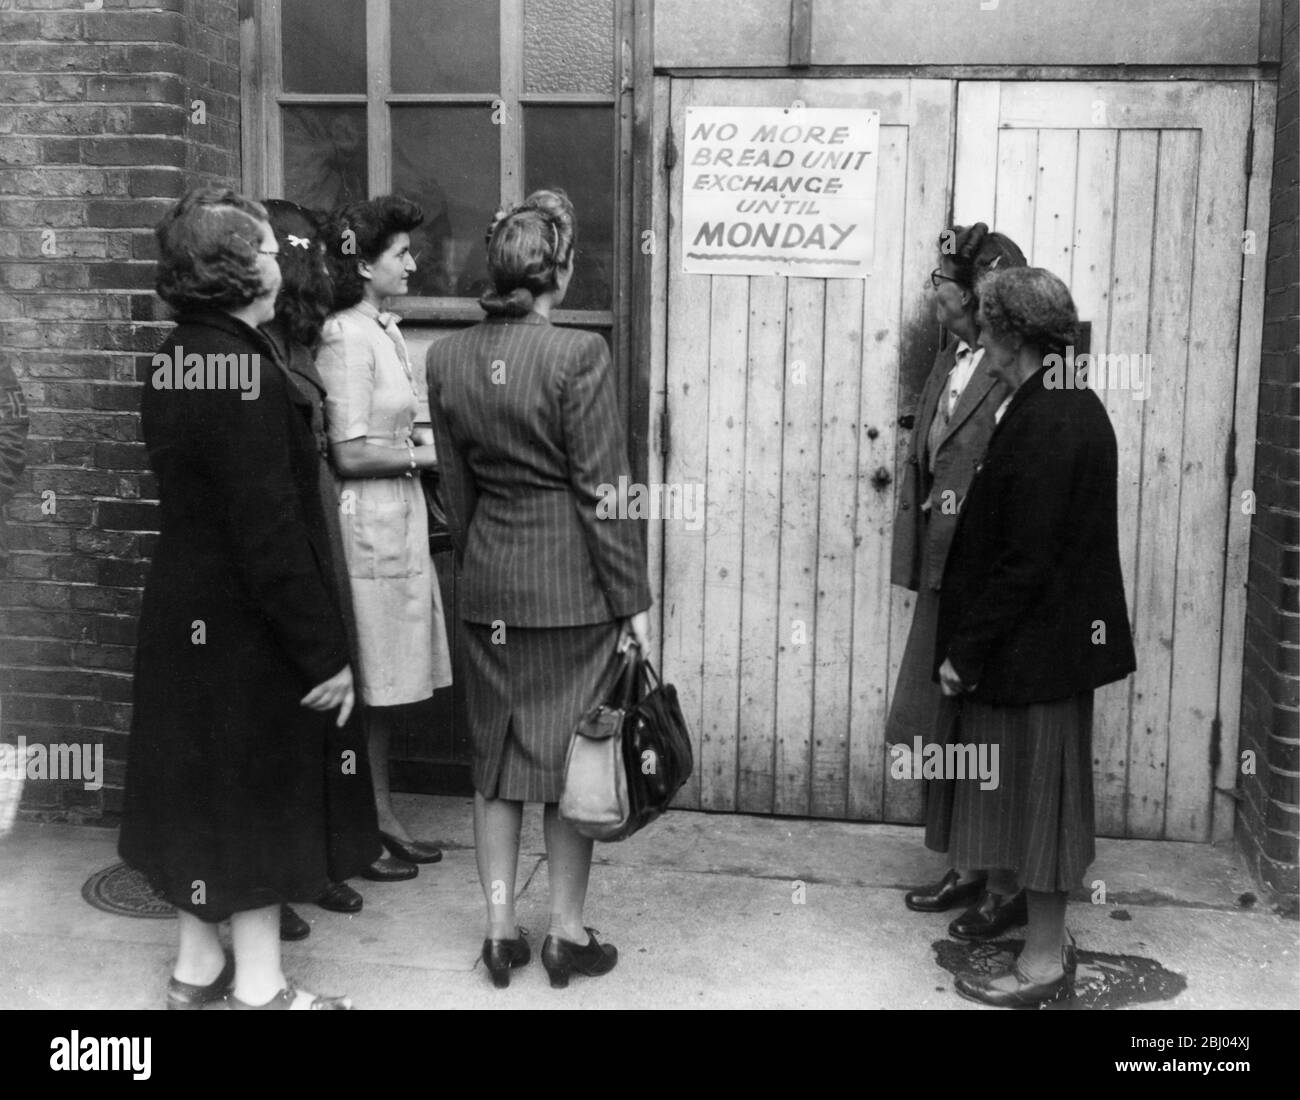 16 August 1946 - After four weeks of bread rationing, millions of surplus units were being exchanged by housewives for points to allow them to buy other goods thus causing a crisis. This London food office was one of many that had to suspend bread unit exchange. - Stock Photo